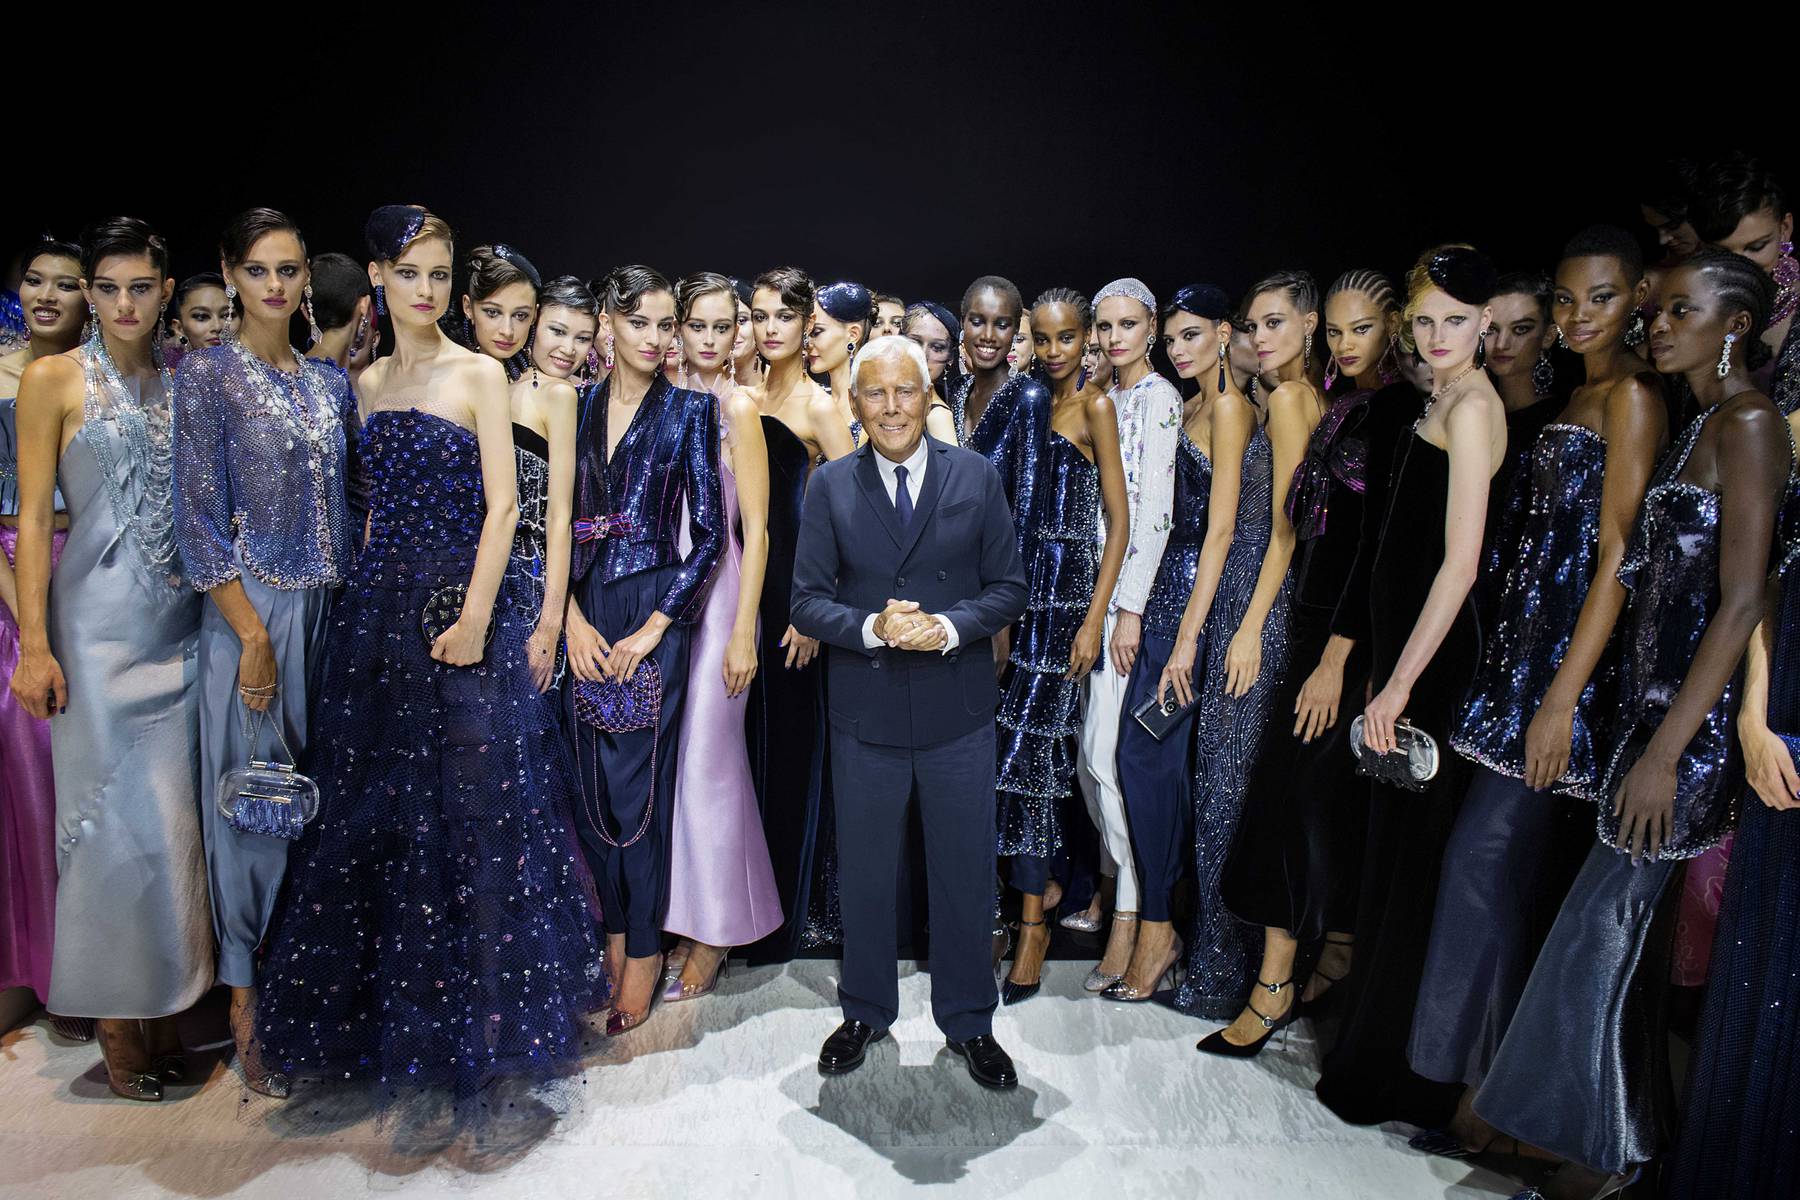 Giorgio Armani poses with models at the end of the runway show for his Privé couture line.